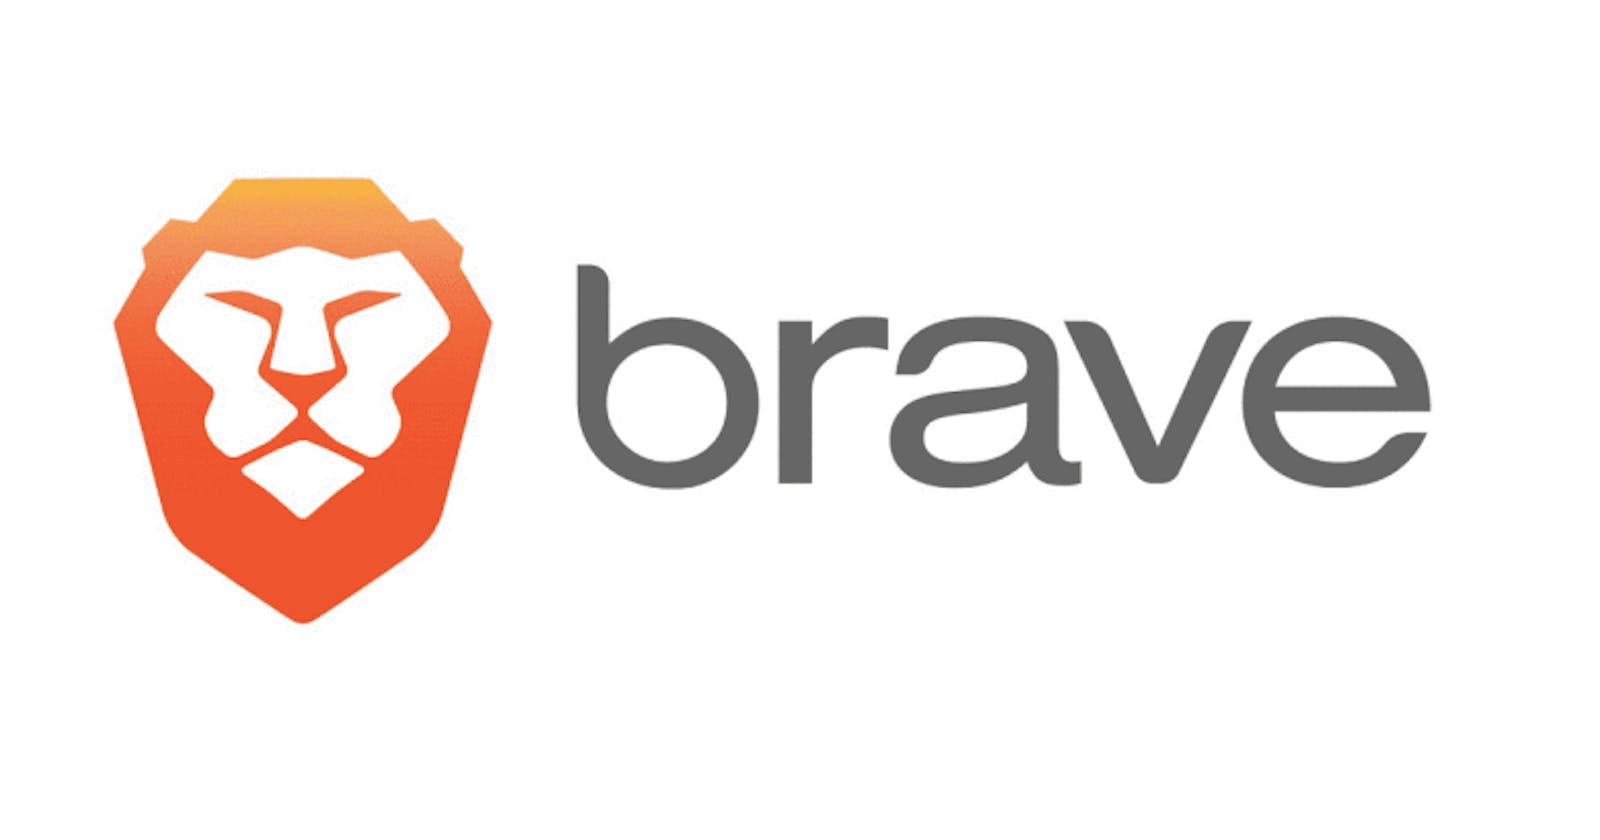 Using Brave Browser for a week